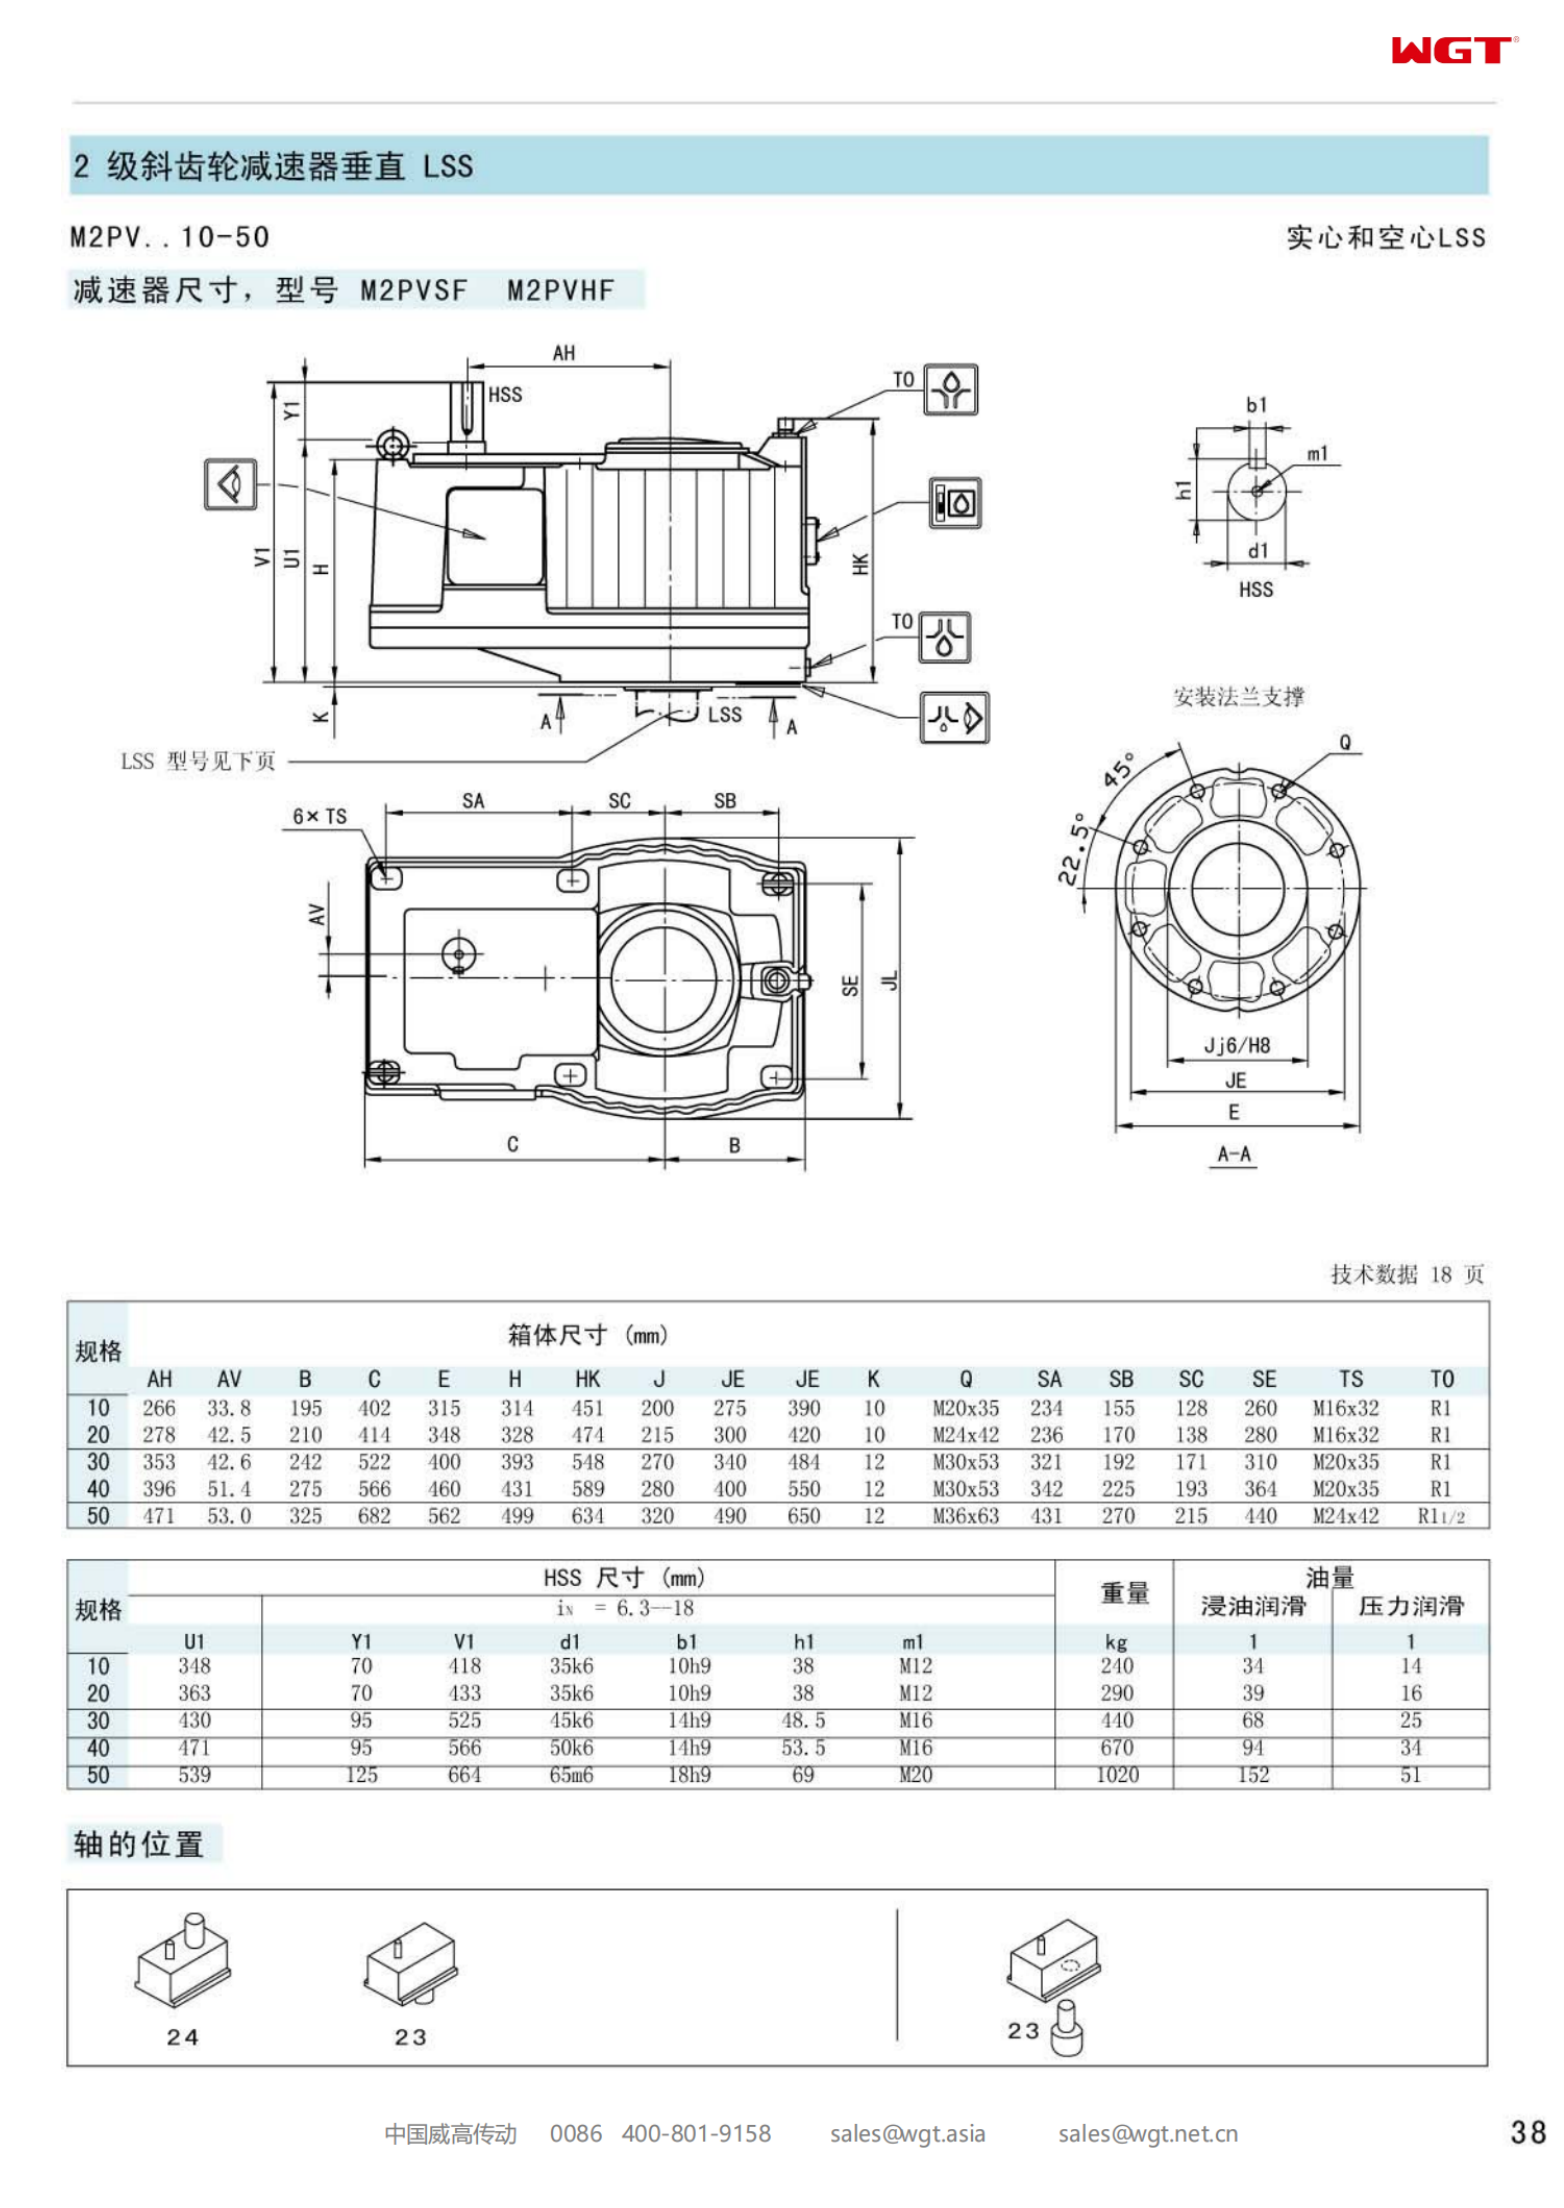 M2PVSF30 Replace_SEW_M_Series Gearbox